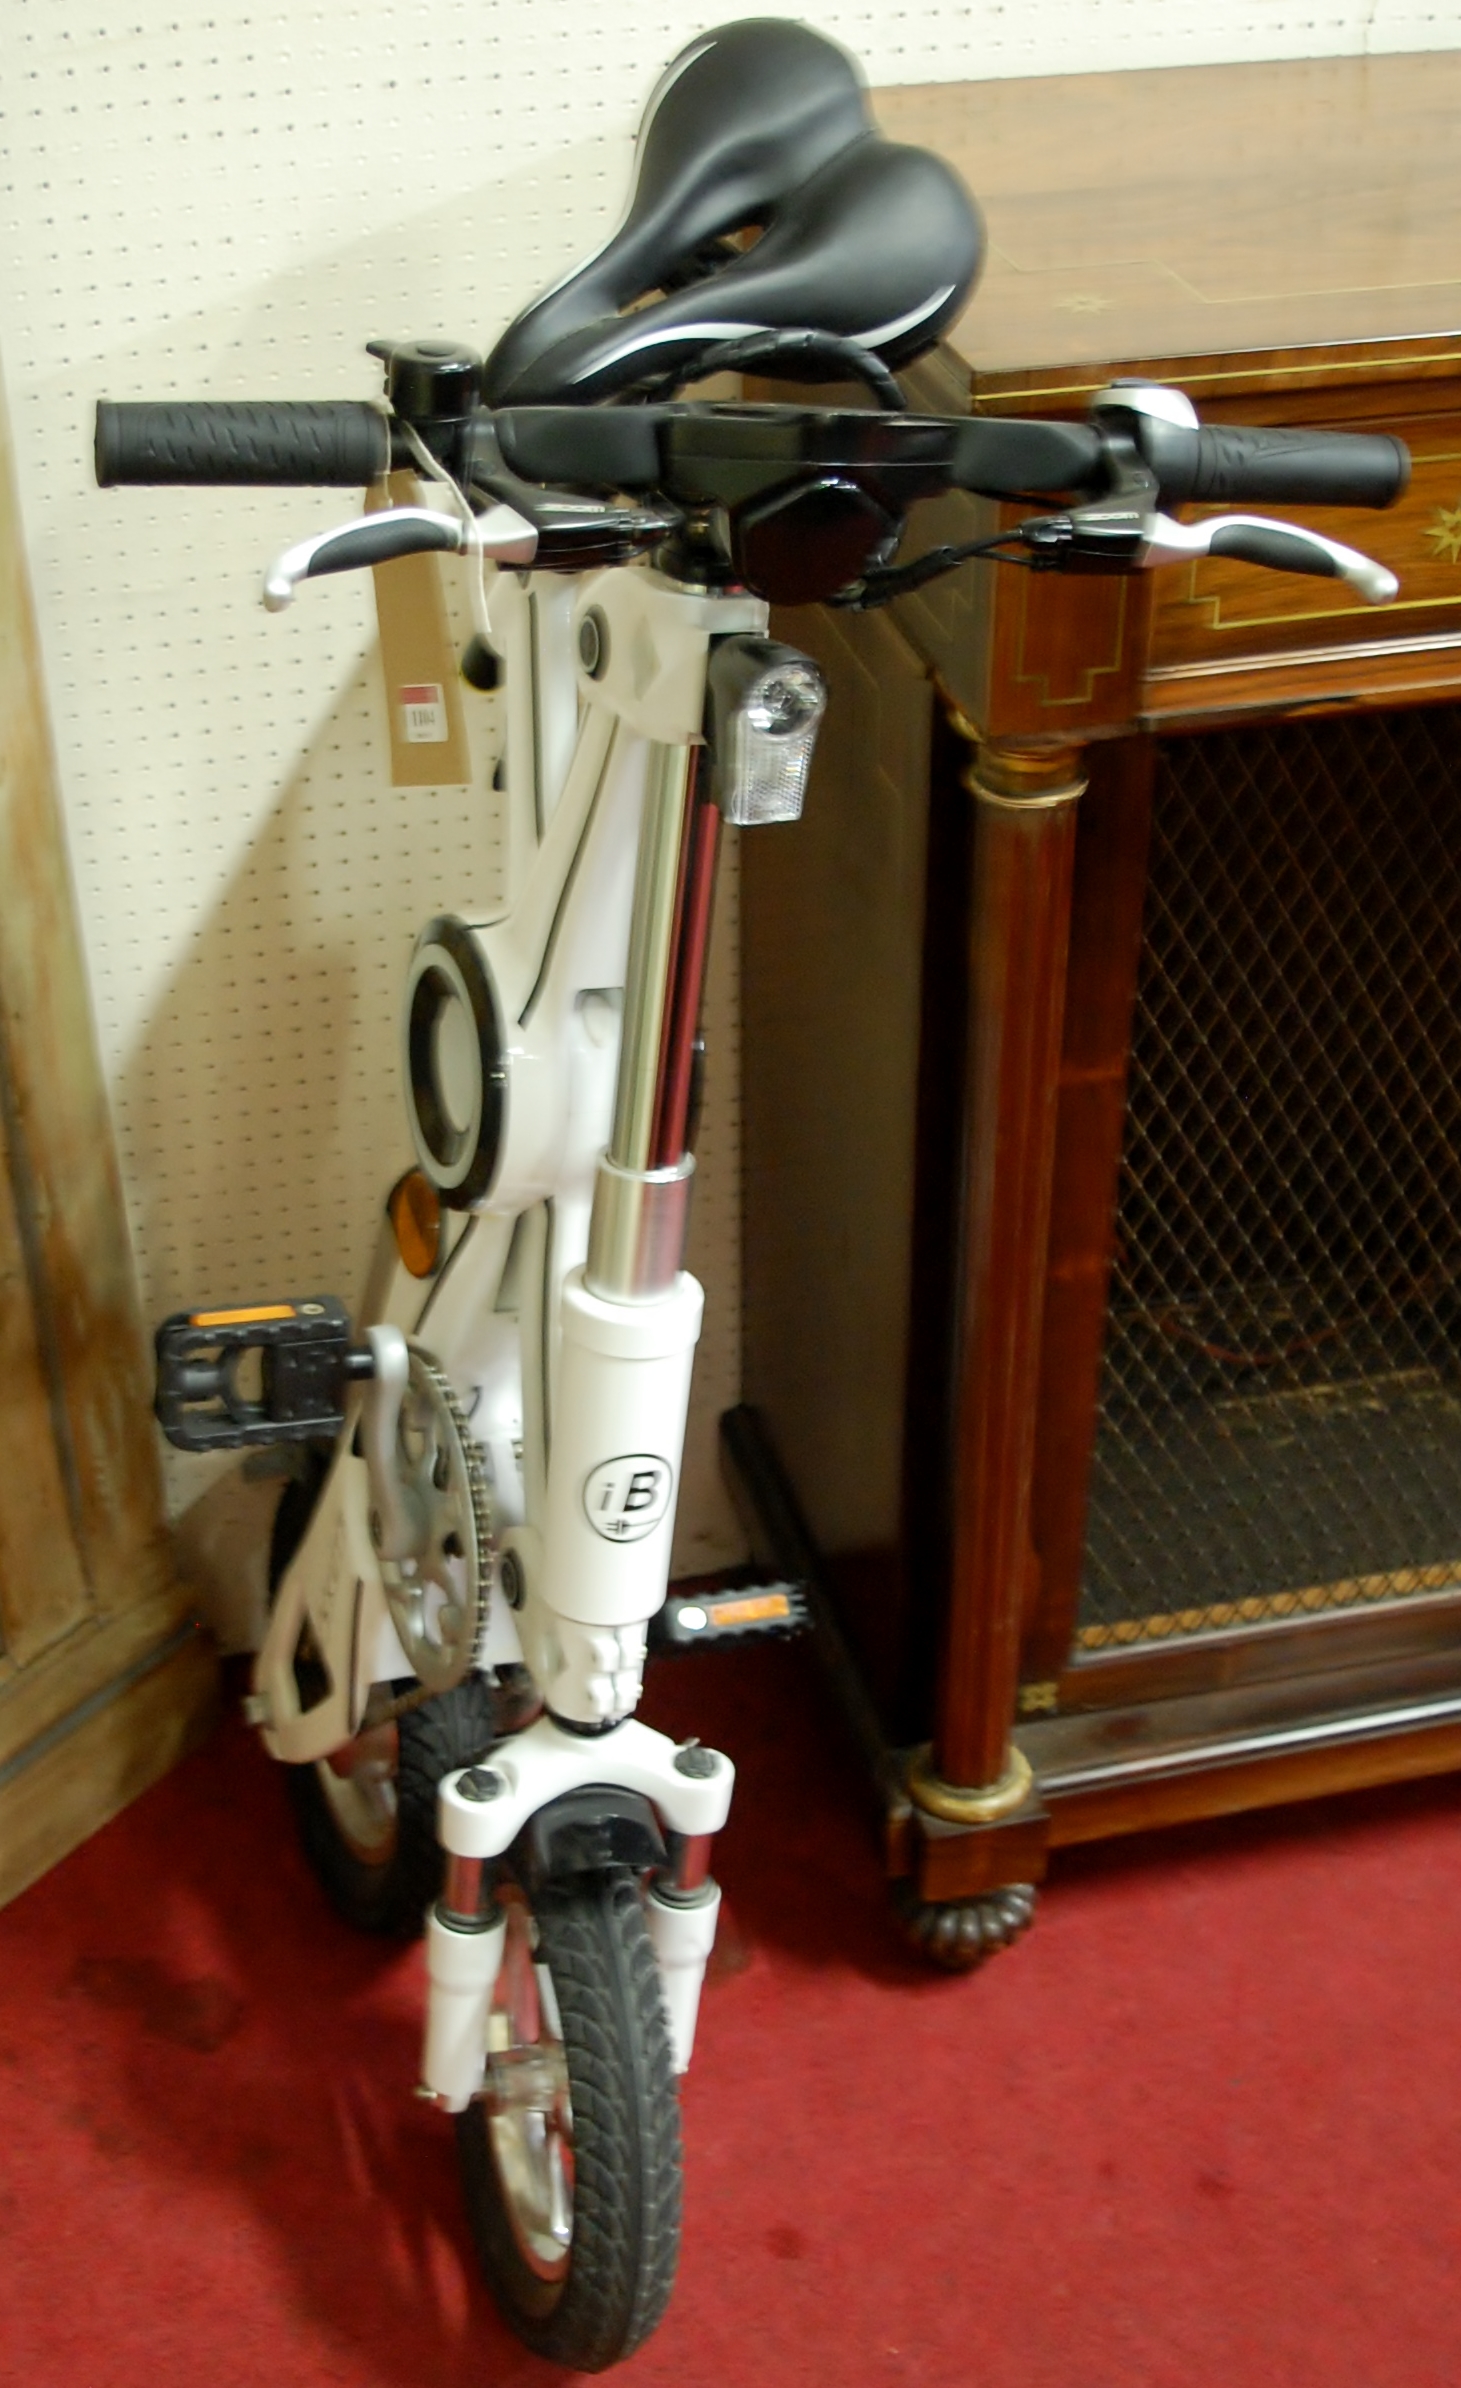 An Eskuta folding electric bike with charging pack and accessories